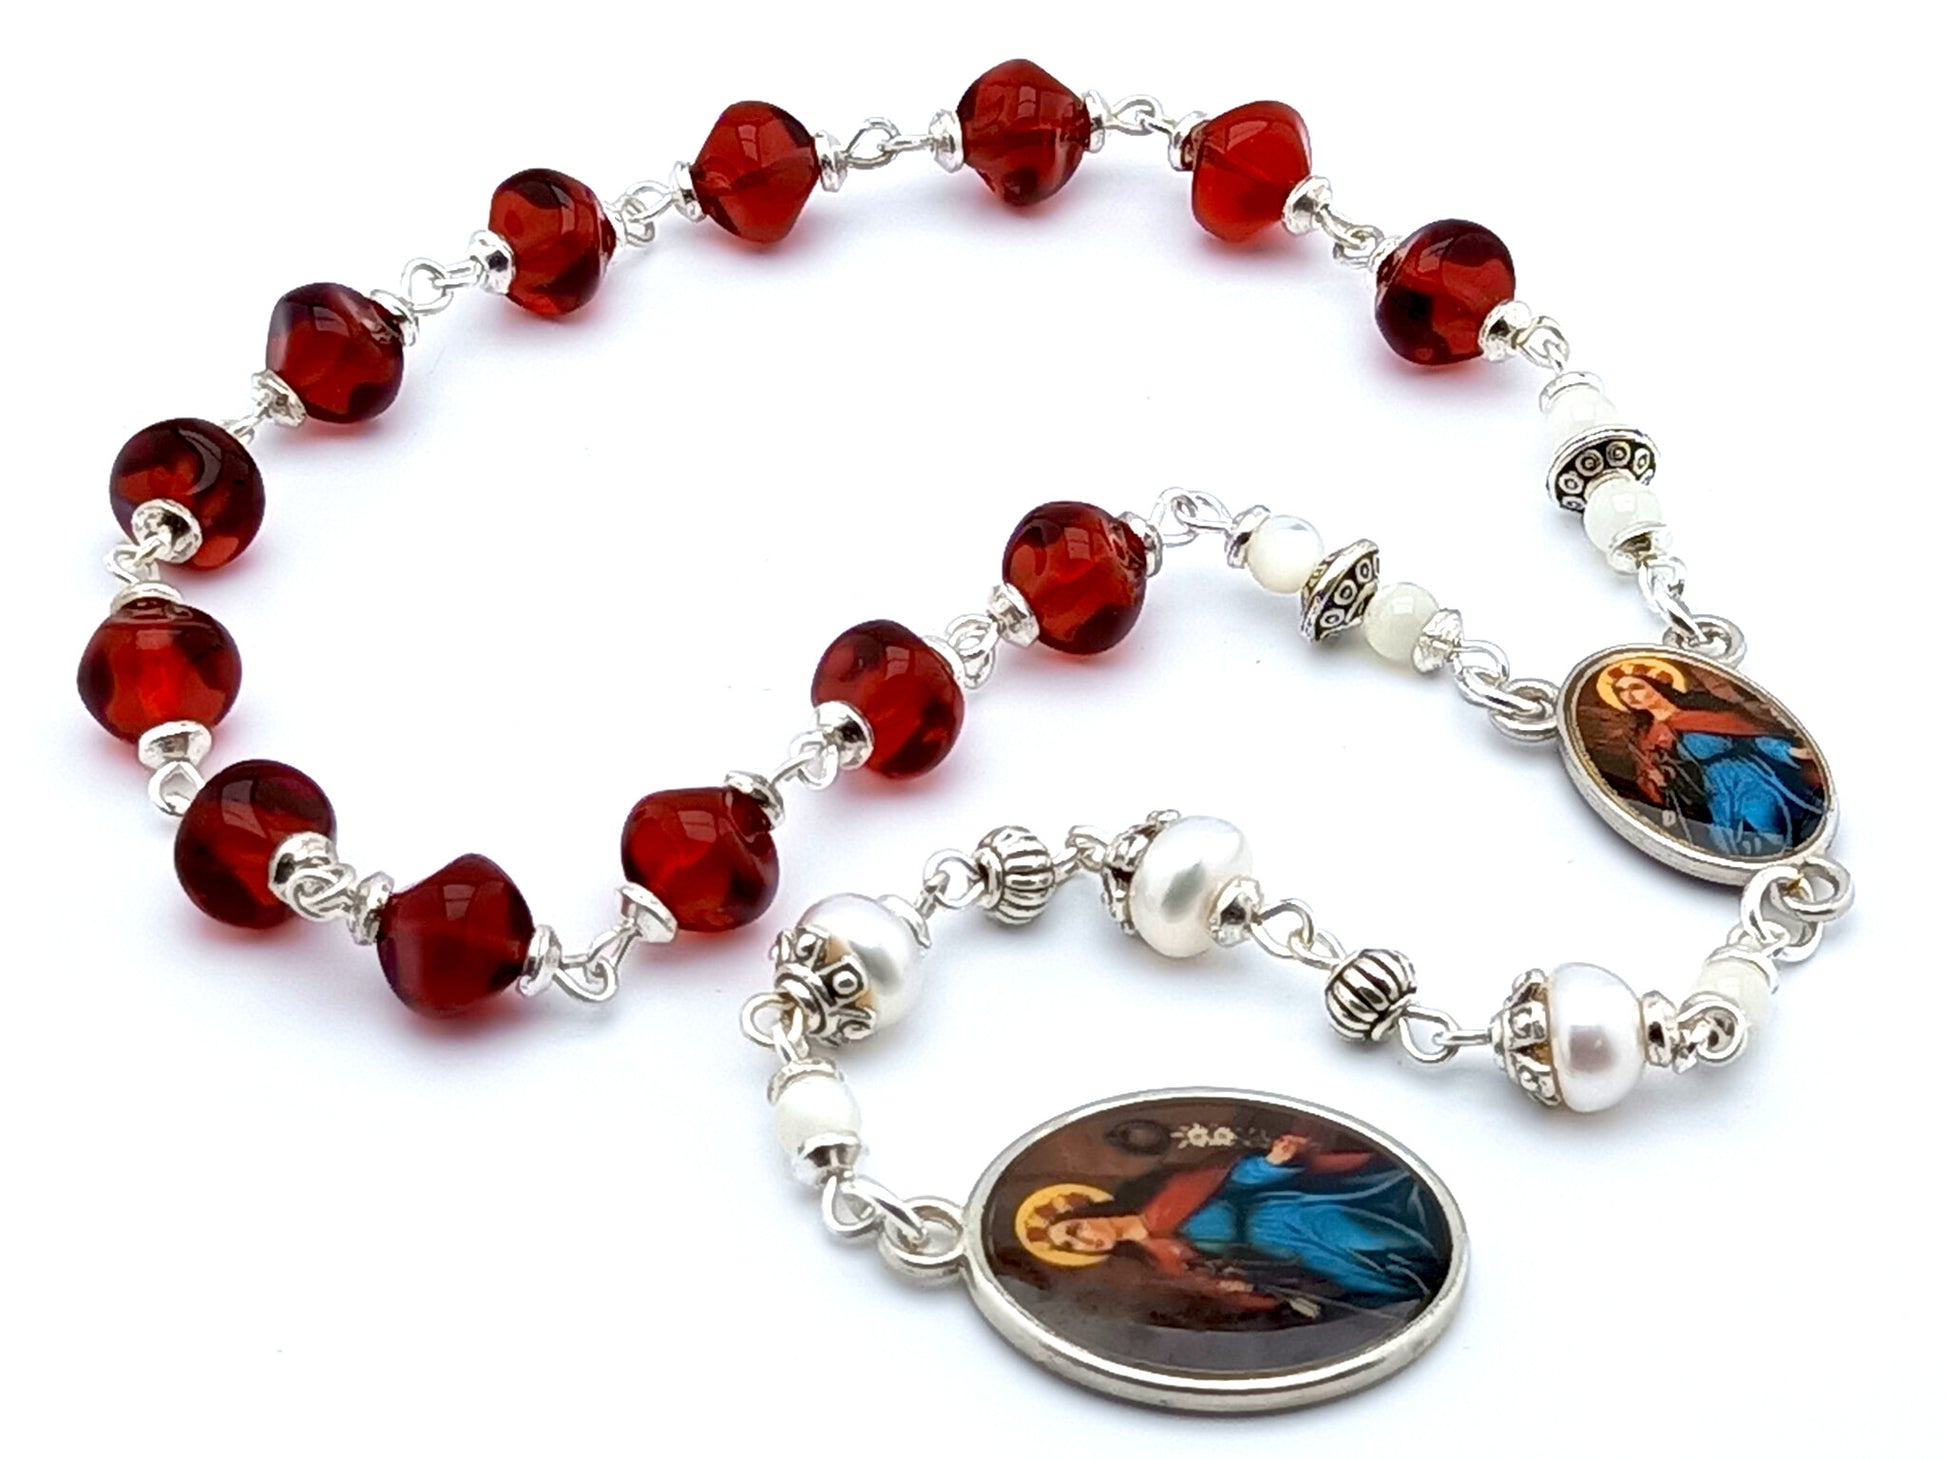 Saint Philomena unique rosary beads prayer chaplet with red nugget glass and pearl beads and double sided picture medals.